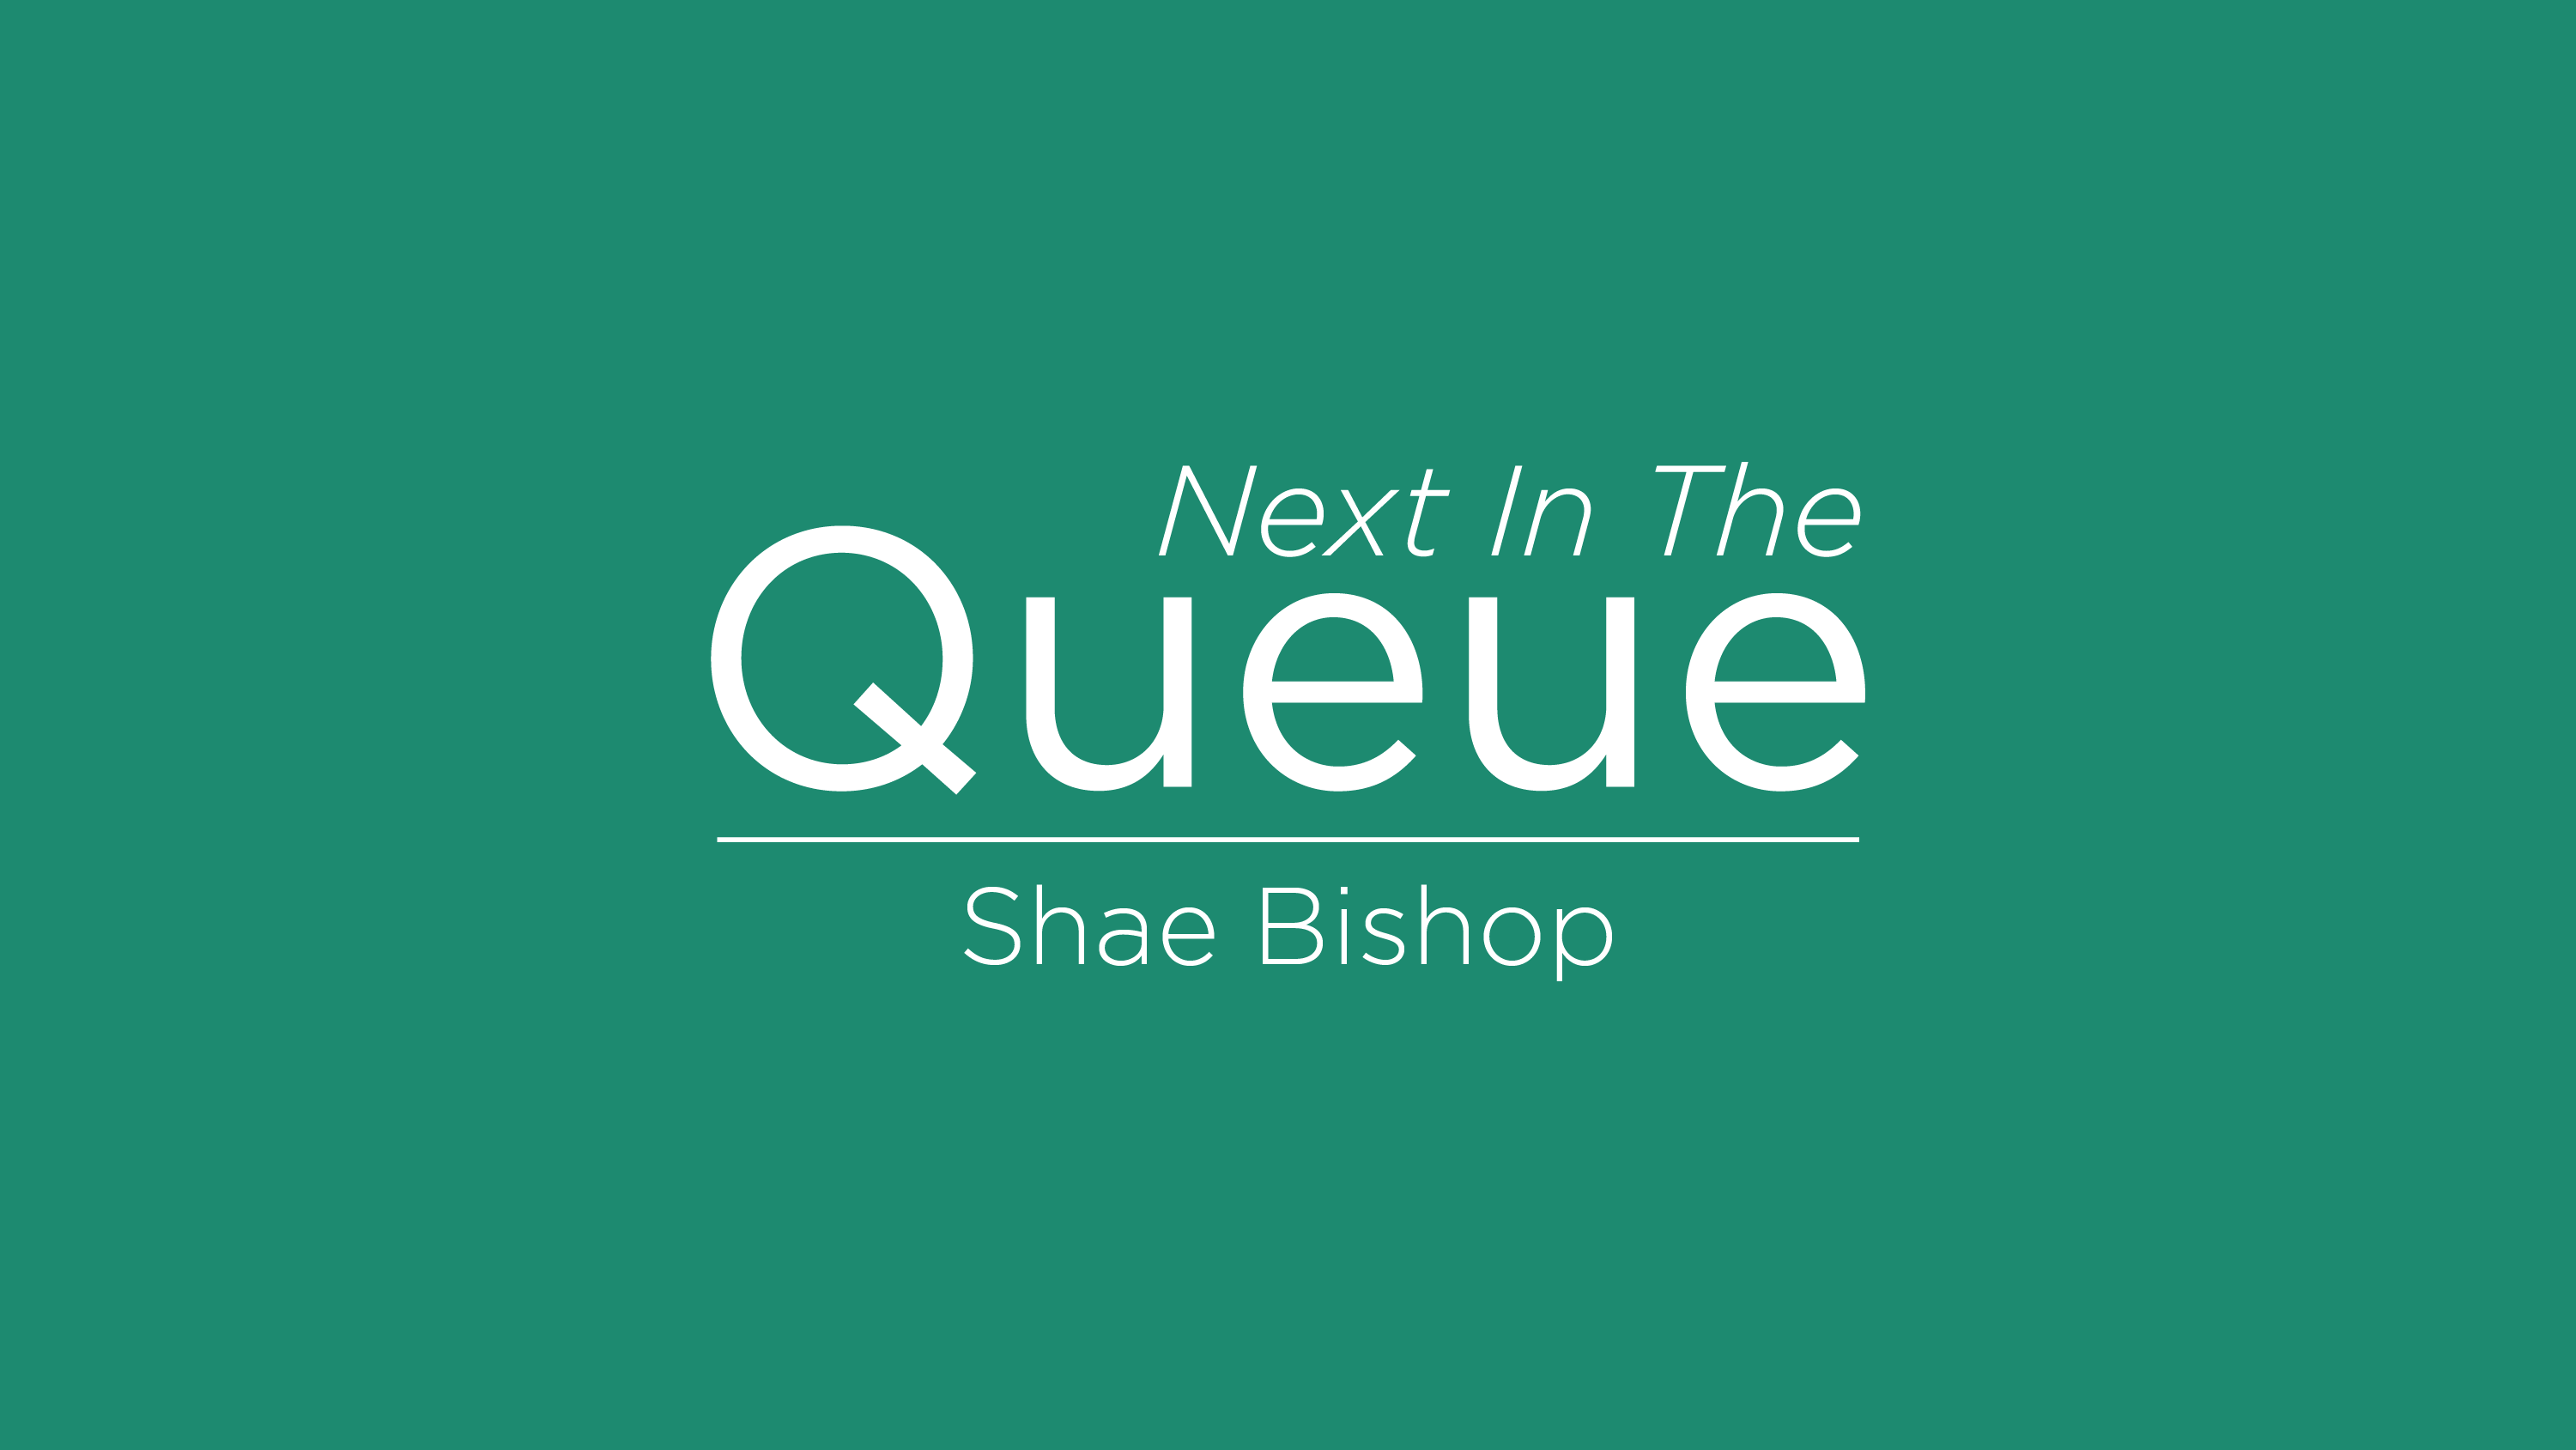 blog post cover graphic for The Queue featuring Shae Bishop